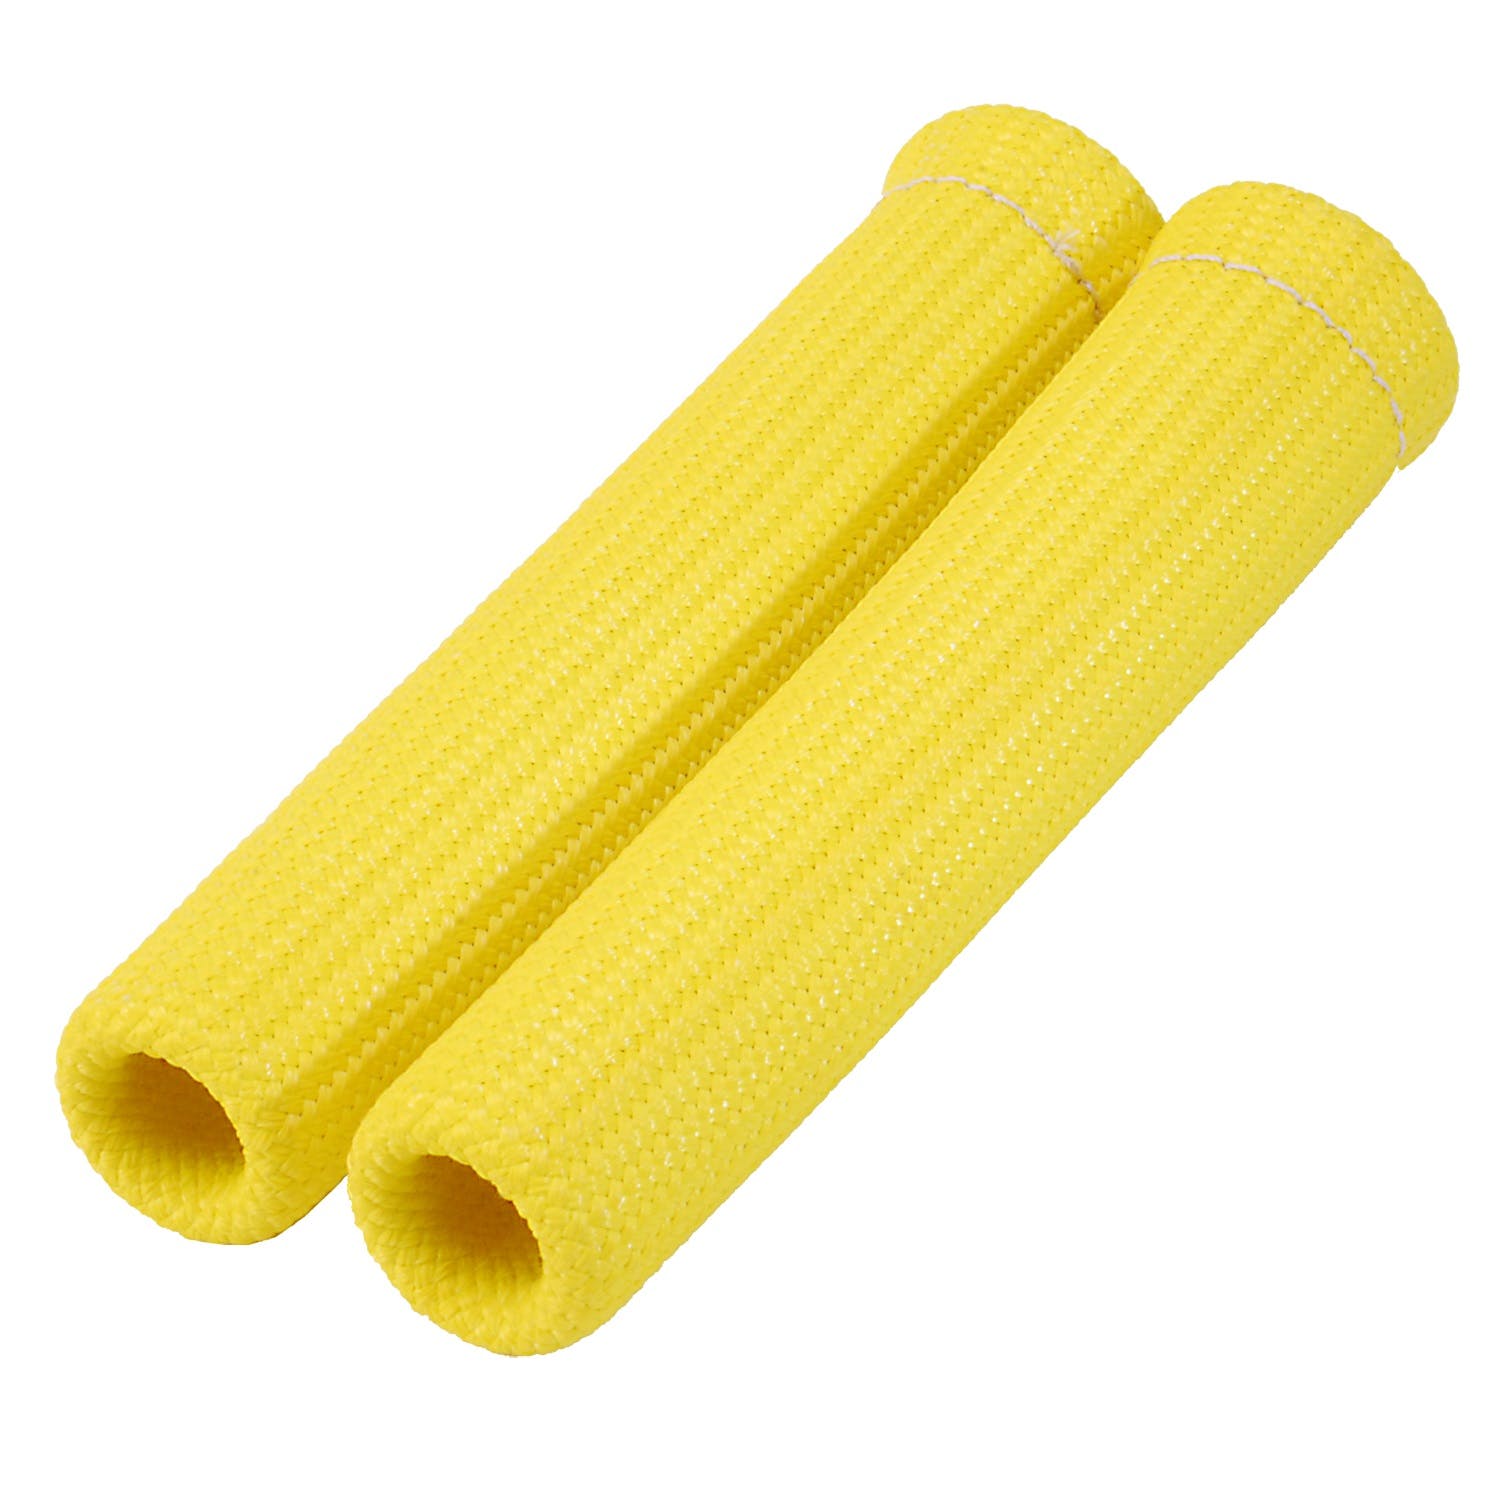 Design Engineering, Inc. 10561 Protect-A-Boot - 6 - 2-pack - Yellow